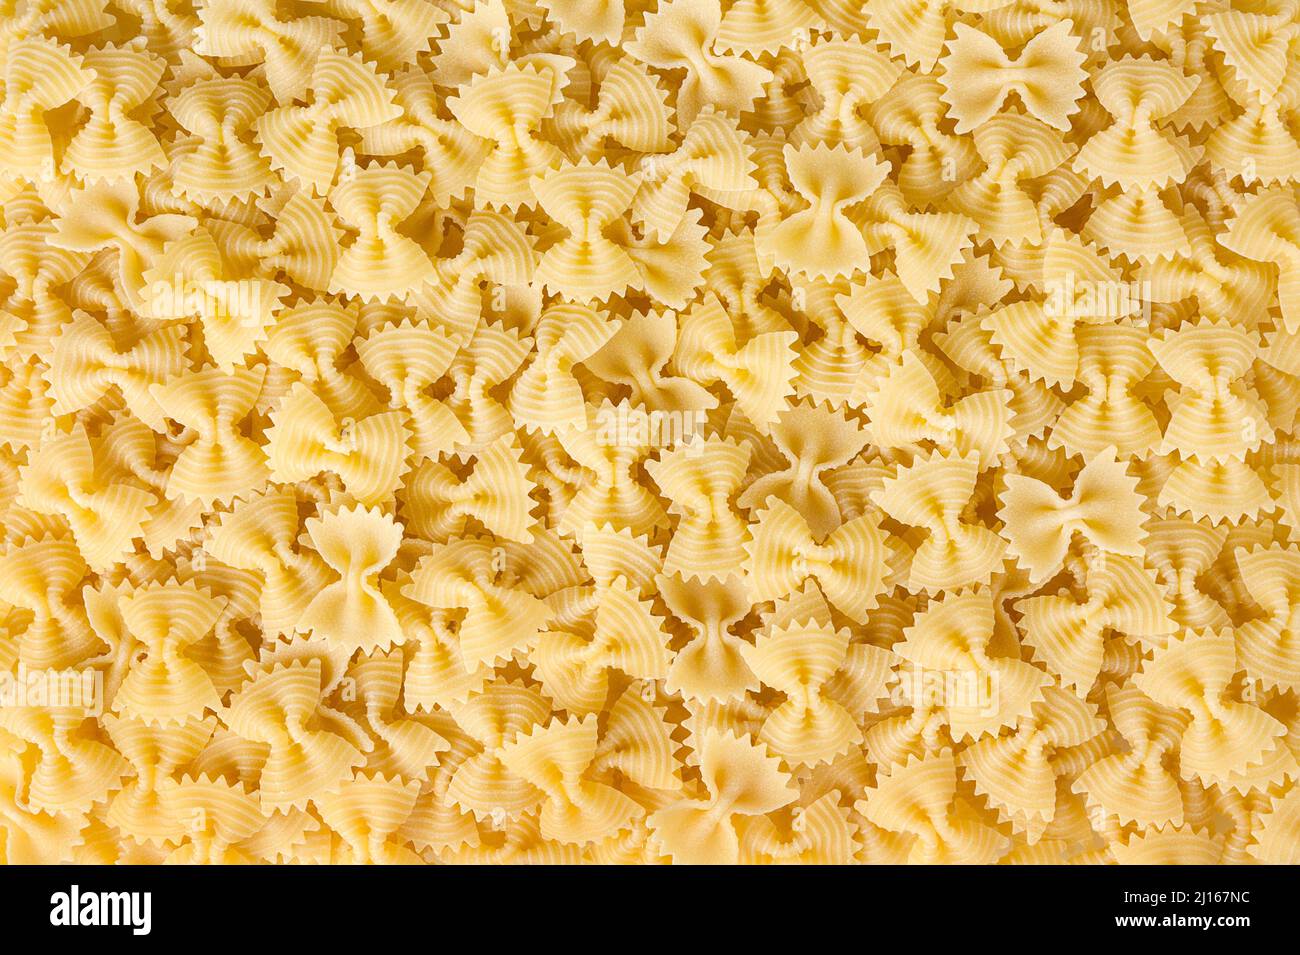 Dried bow tie pasta background Stock Photo